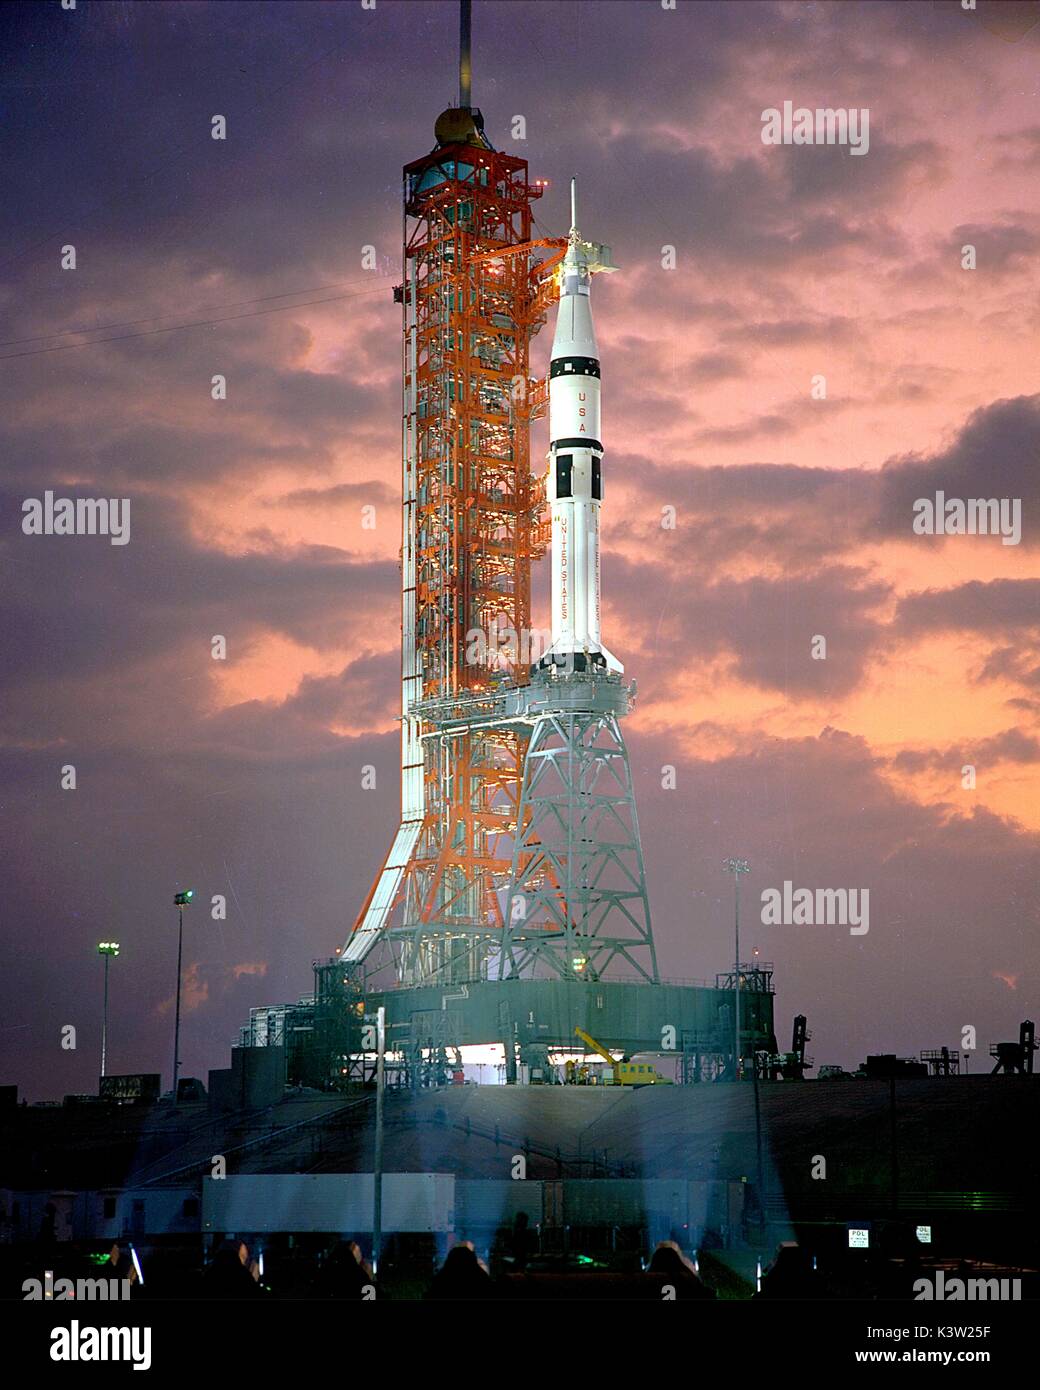 Dawn breaks behind the ASTP Saturn IB launch vehicle during the Countdown Demonstration Test for the Apollo Soyuz Test Project at the Kennedy Space Center July 2, 1975 in Cape Canaveral, Florida.  The mission will carry astronauts Thomas Stafford, Vance Brand and Donald Slayton to the dock with a Russian Soyuz spacecraft demonstrating that two different spacecraft can dock in space.  (photo by NASA/ Kennedy Space Center via Planetpix) Stock Photo